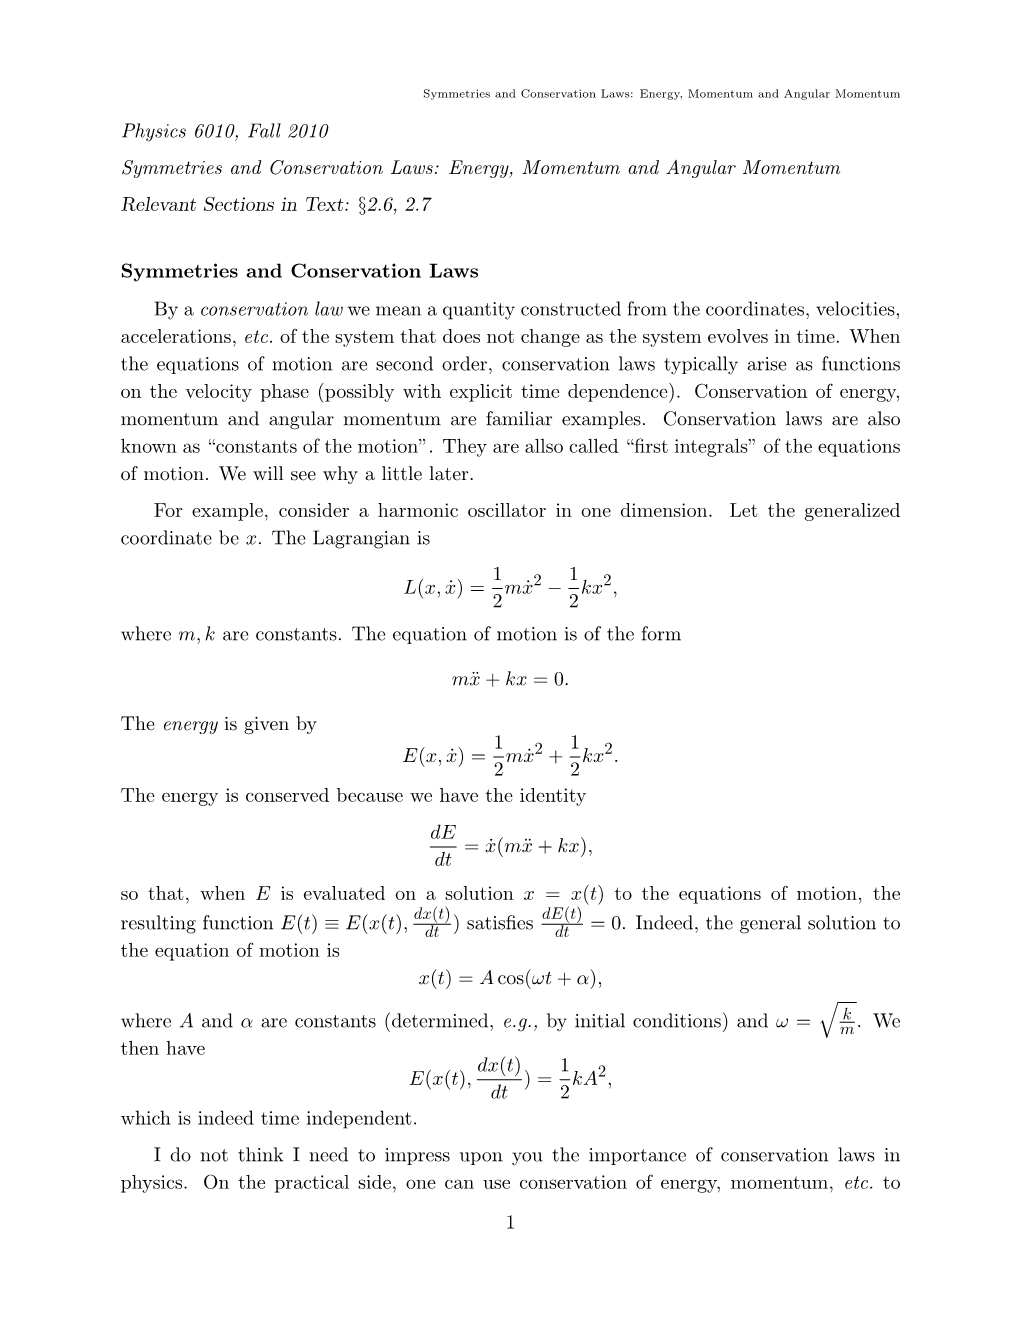 Physics 6010, Fall 2010 Symmetries and Conservation Laws: Energy, Momentum and Angular Momentum Relevant Sections in Text: §2.6, 2.7